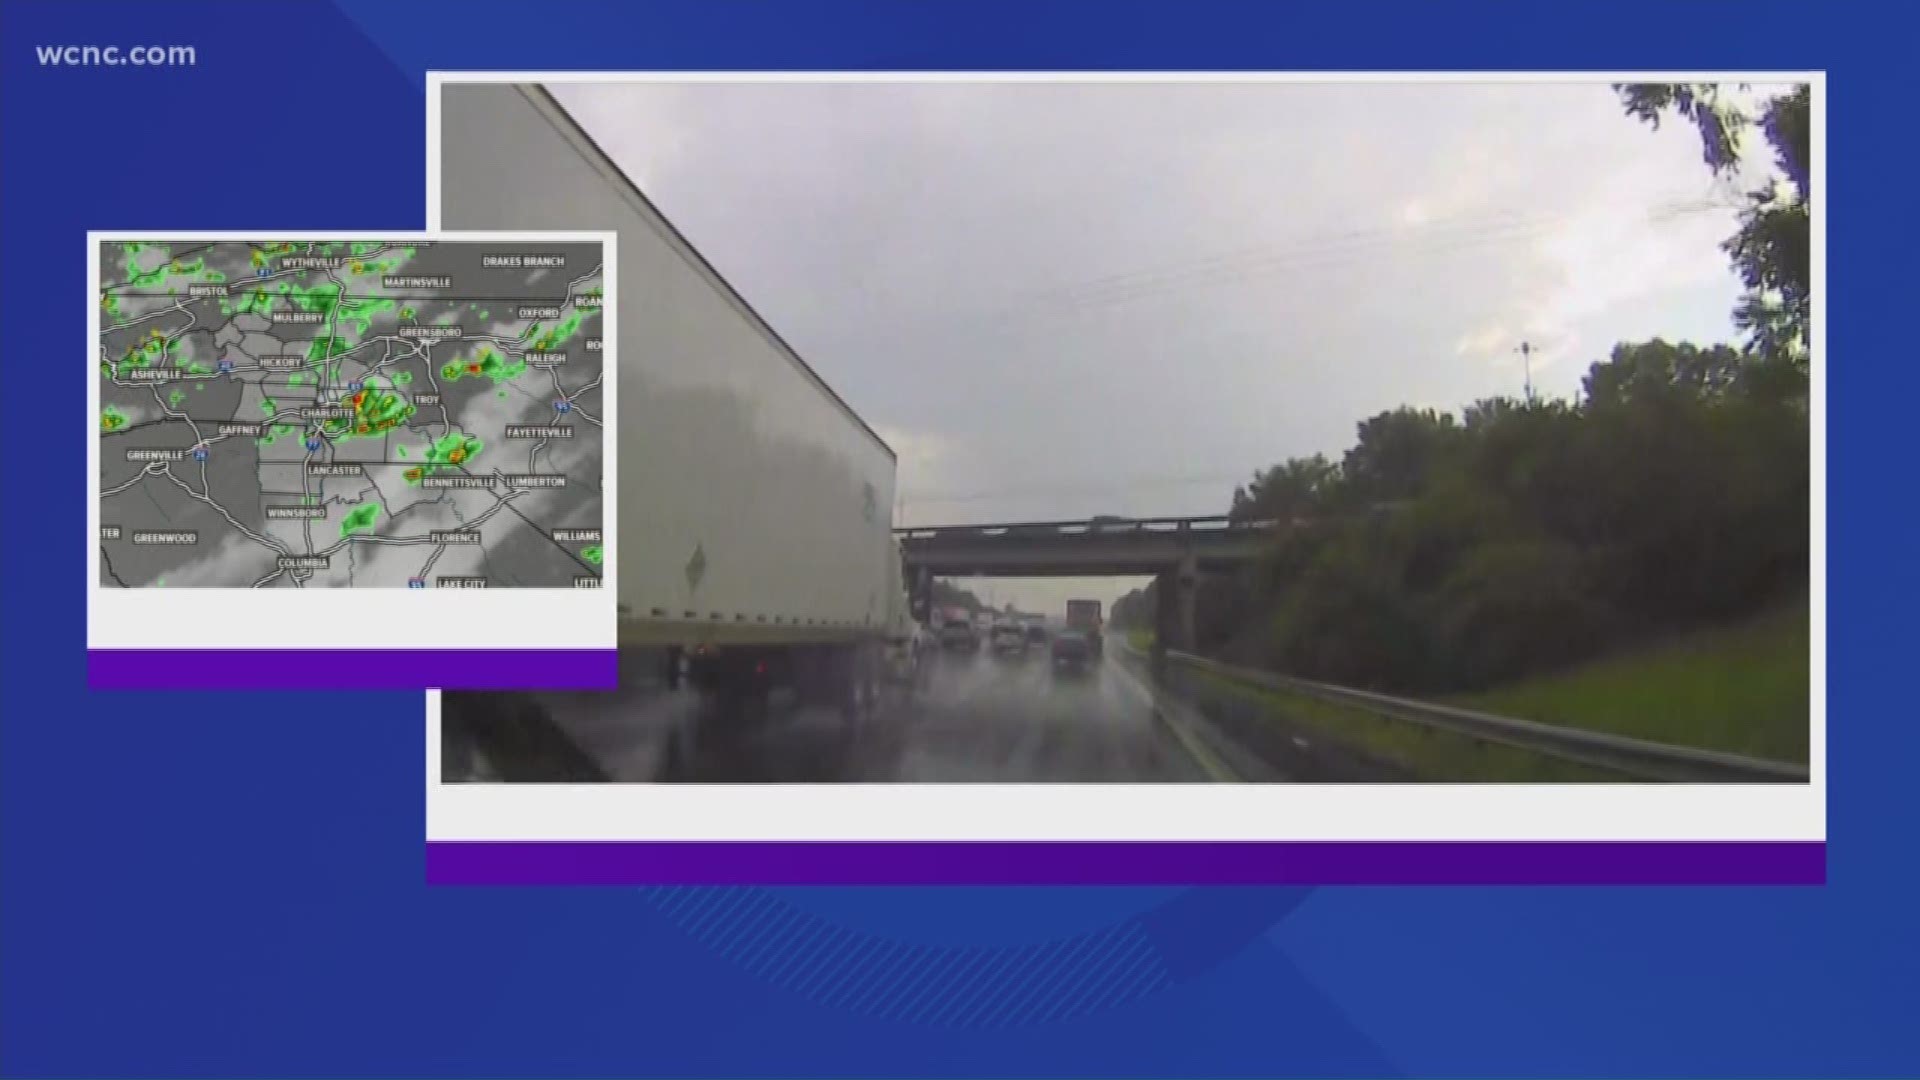 The WCNC weather team is tracking the weather moving through the area, and how the heavy rain could impact commutes.